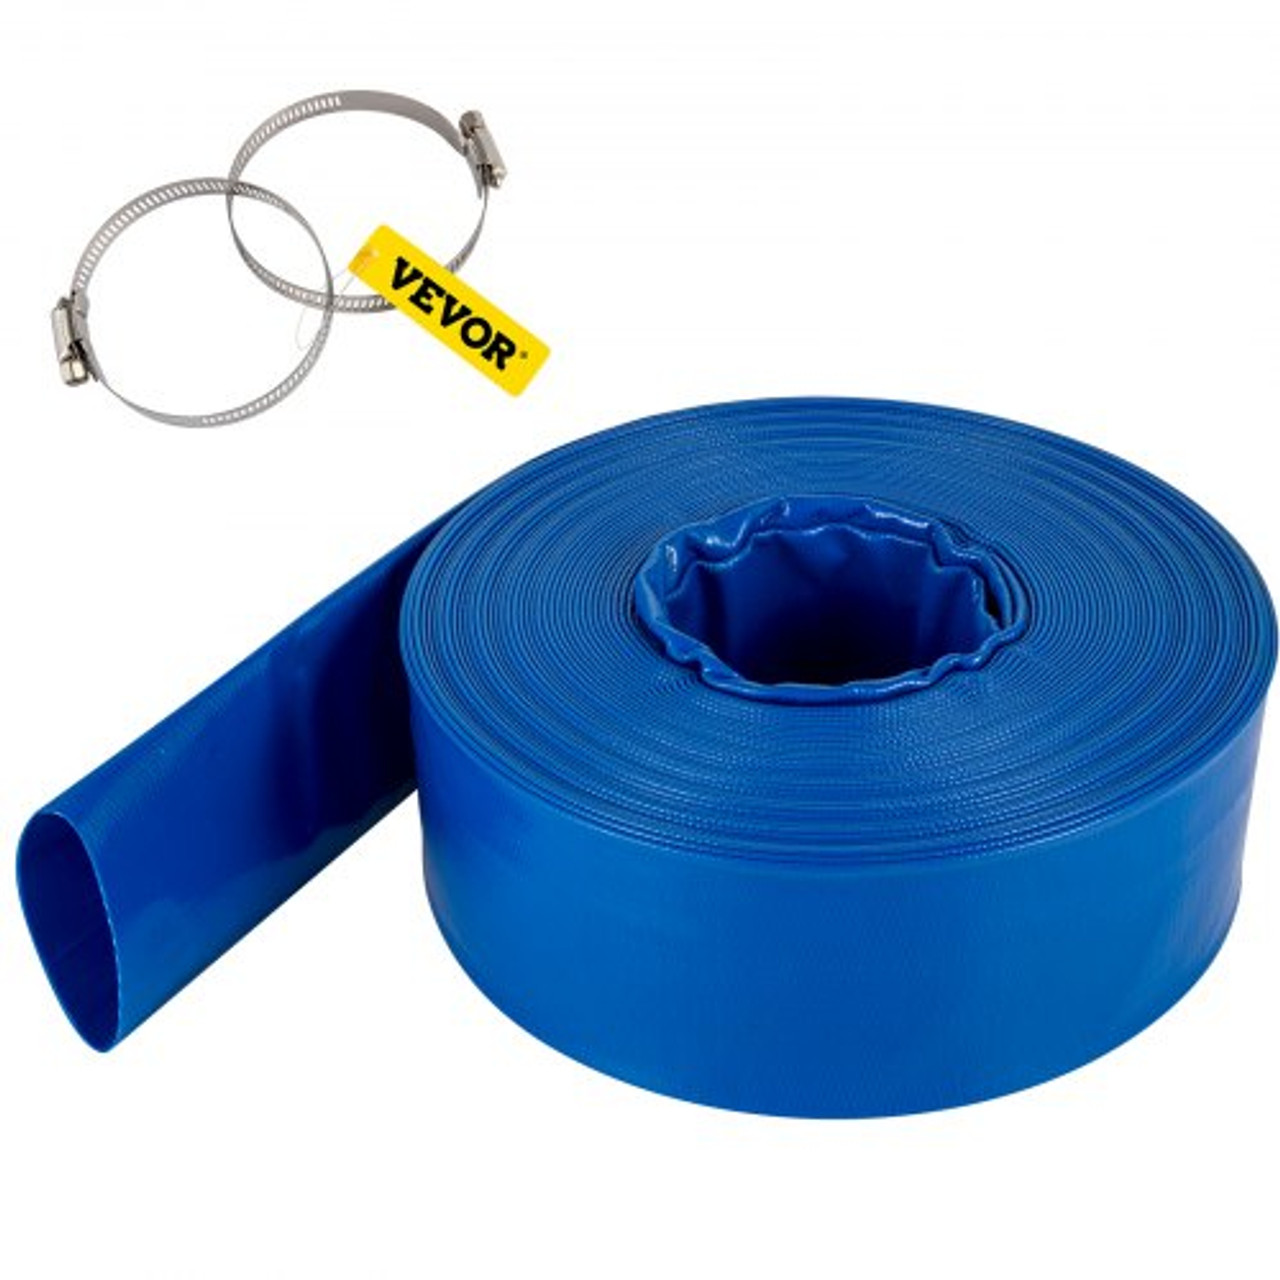 Discharge Hose, 4" x 105', PVC Lay Flat Hose, Heavy Duty Backwash Drain Hose with Clamps, Weather-proof & Burst-proof, Ideal for Swimming Pool & Water Transfer, Blue